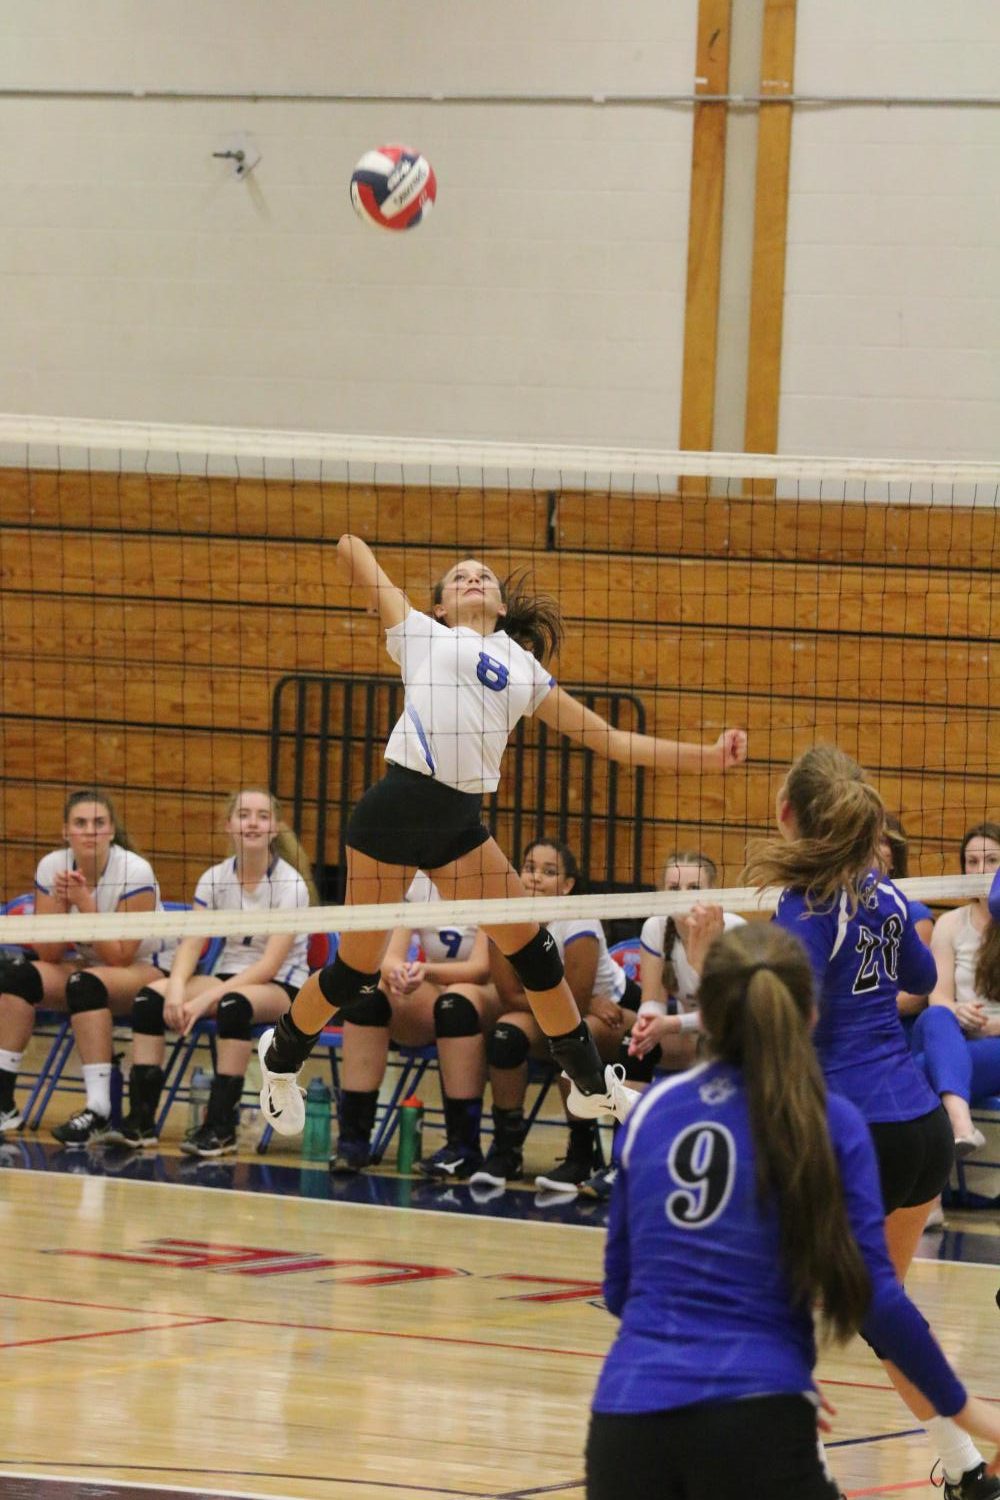 Junior Sydney Fowler leaps for a spike